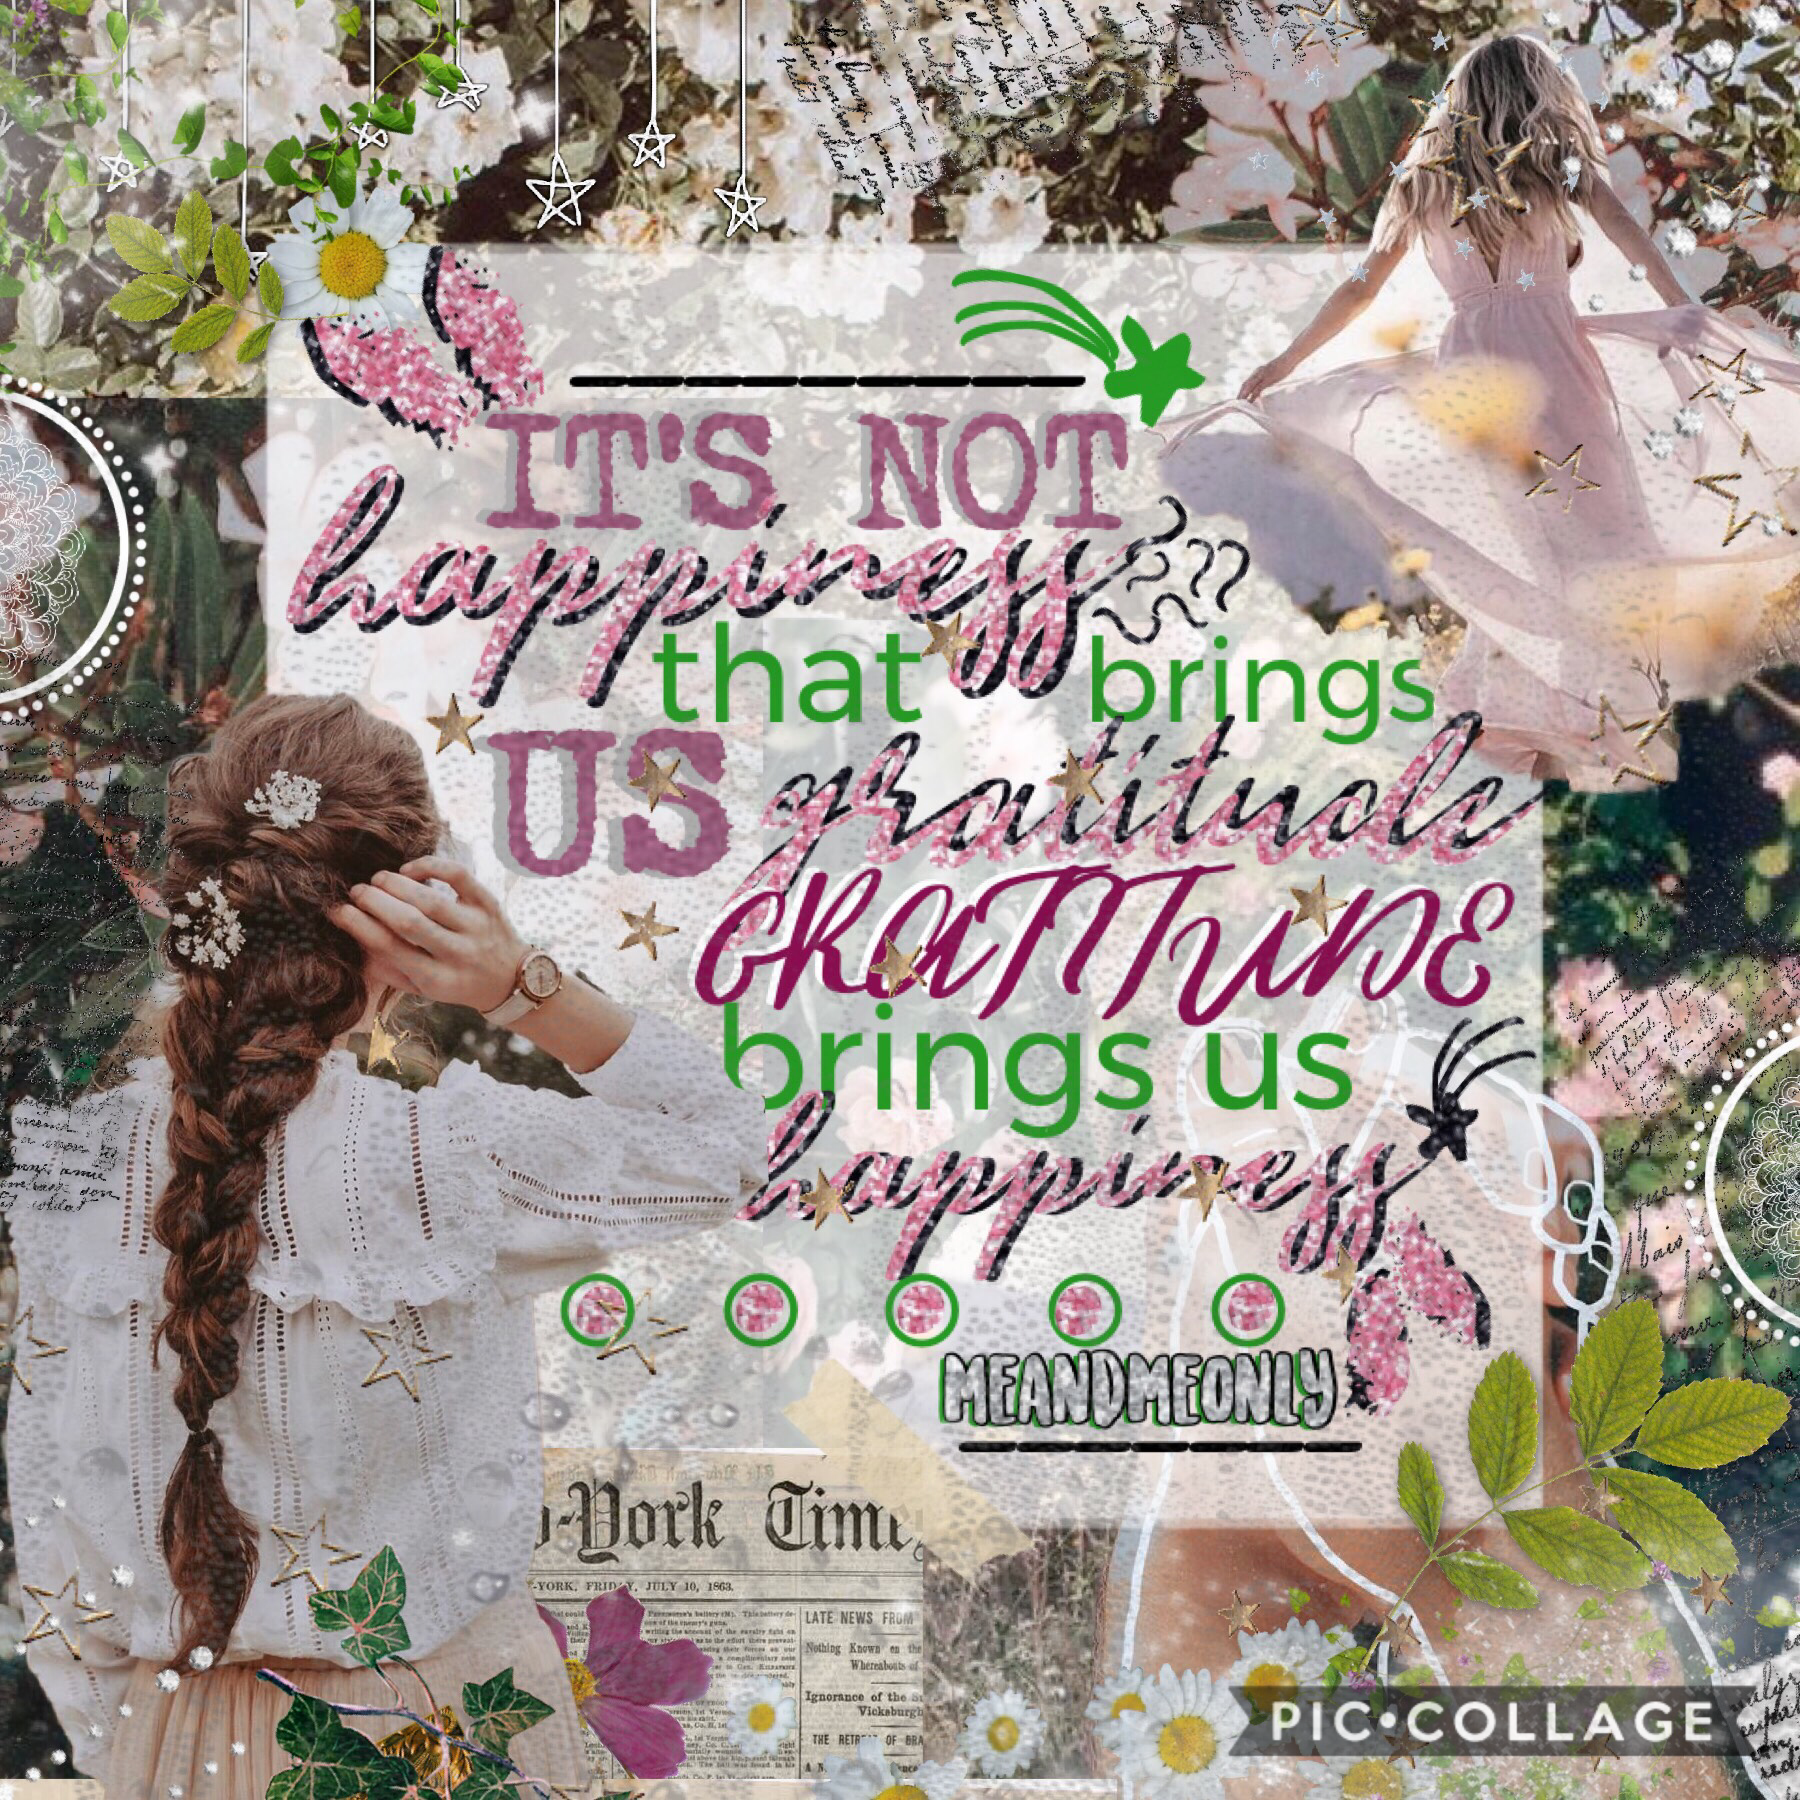 entry to @piccollage’s contest🌿✨🌼 eh I think I did it wrong lol oh well😅 anyway how was everyone’s day?💘 lol i need to find a style to stick with🤪🌻 QOTD: fav day of the week? 
AOTD: definitely thursday, or saturday💫😝🌷🌸 anyway à bientôt 👋 